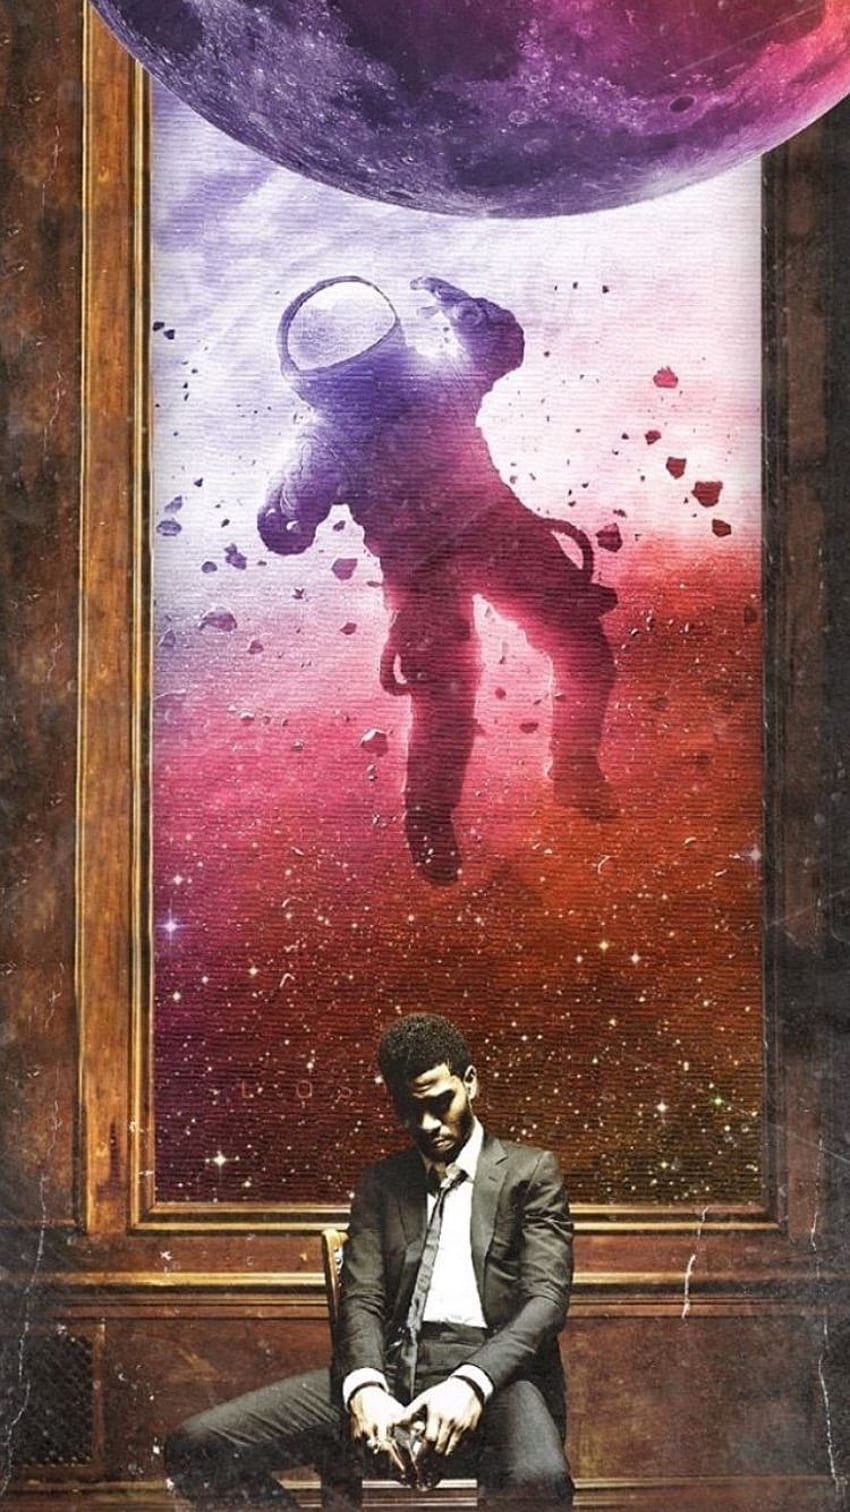 Man on The Moon 3 Kid Cudi for mobile phone, tablet, computer and other devices. Kid cudi , Anime , Graffiti iphone HD phone wallpaper